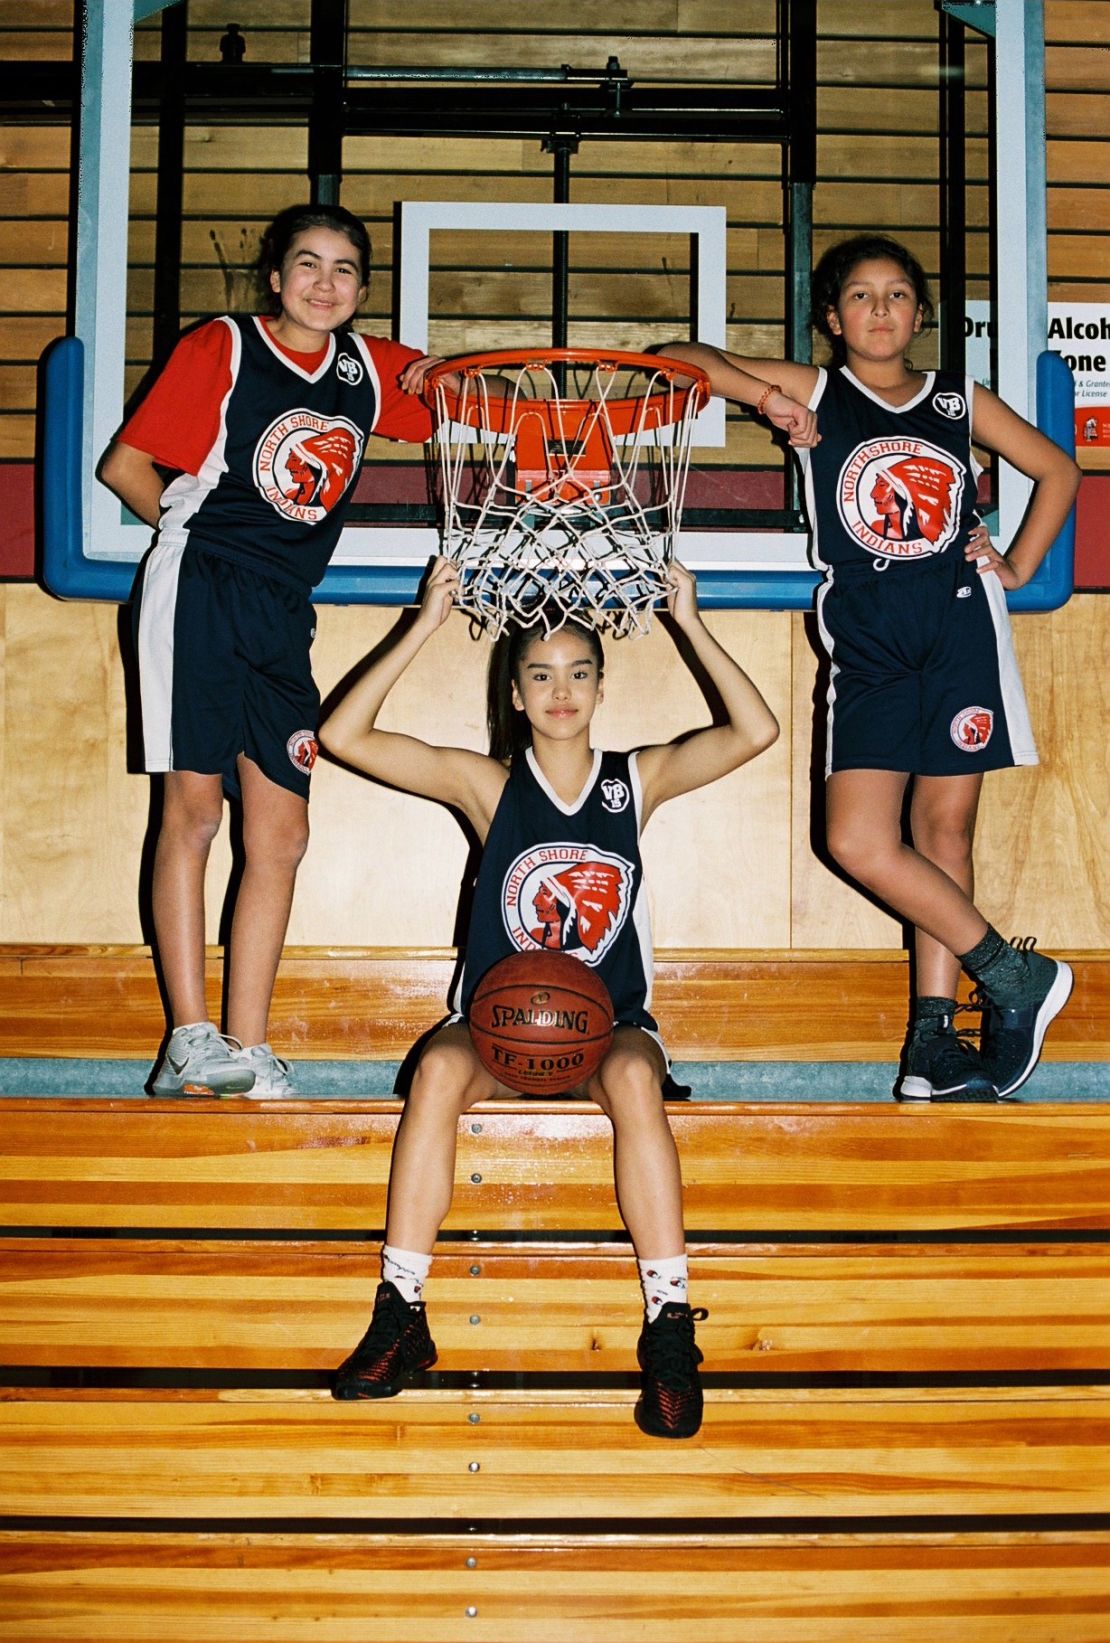 The Canadian photographer was invited to work with the basketball players by their sports coordinator as a way to keep them "pumped and engaged."